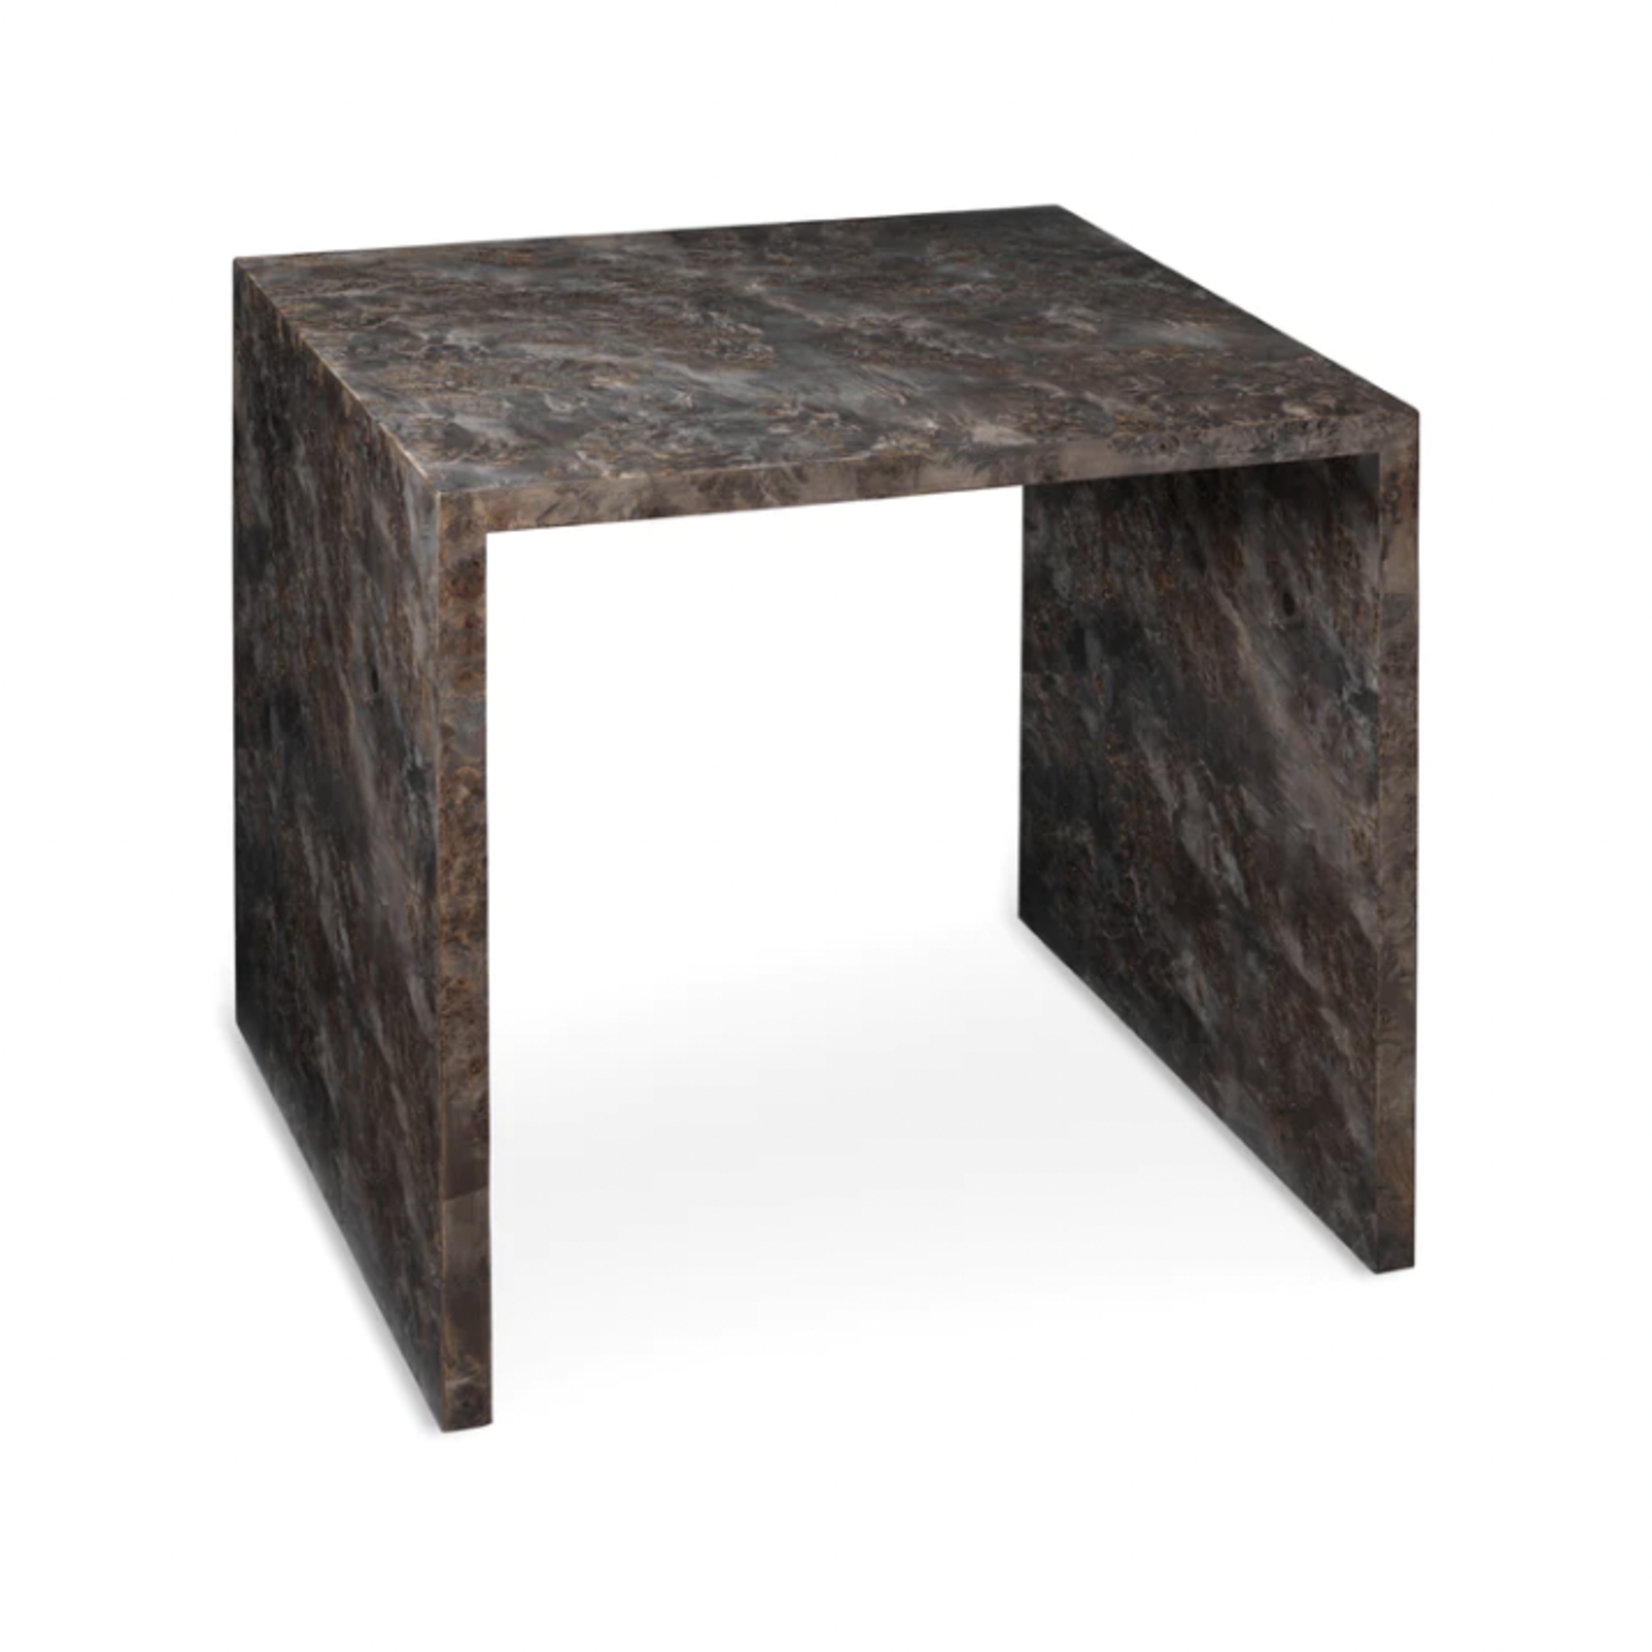 G3 Bedford Nesting Tables, Set of 2, Charcoal